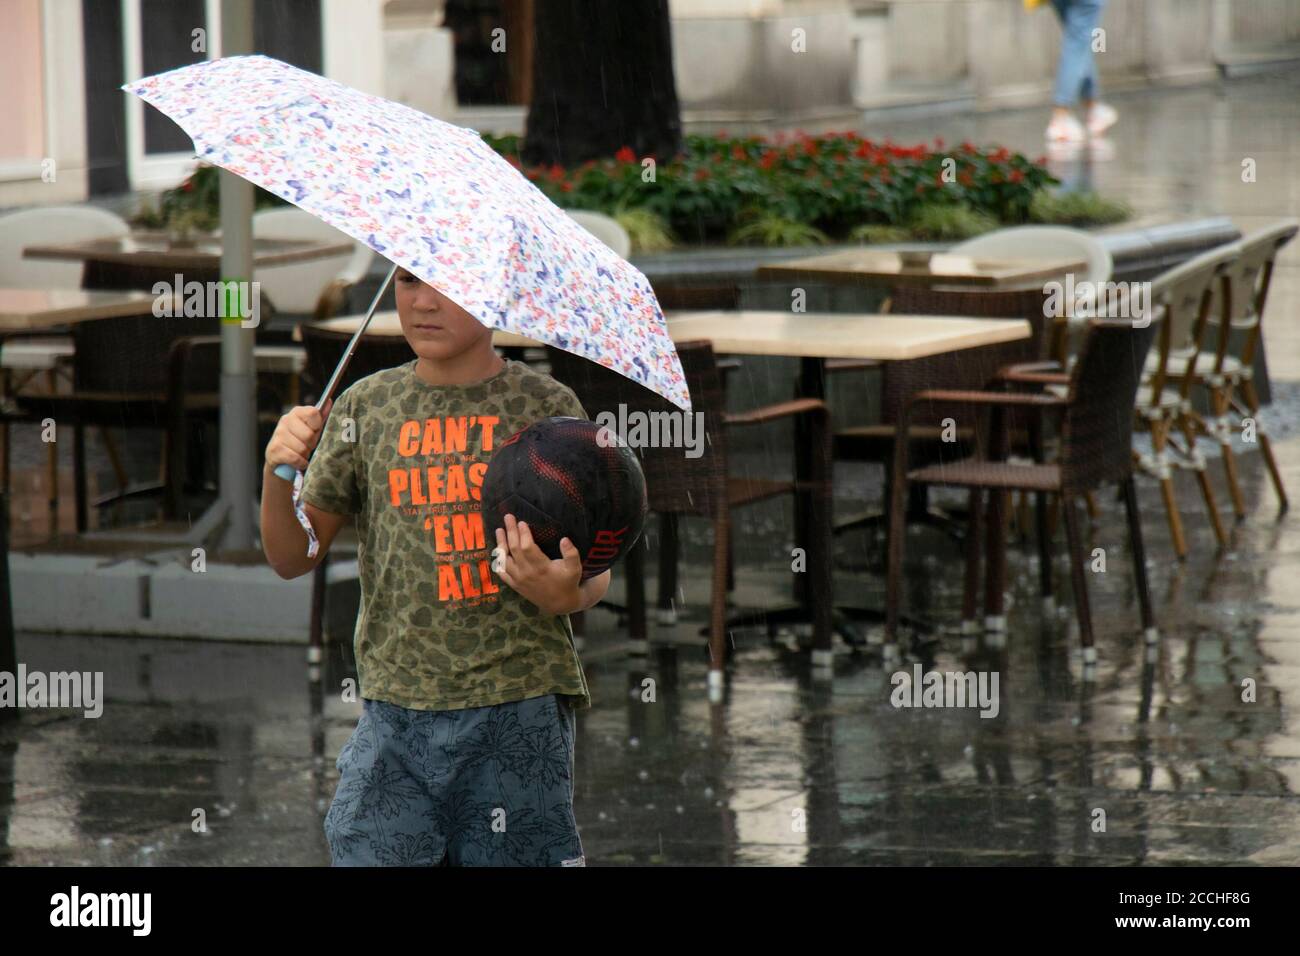 Belgrade, Serbia - August 5, 2020: Young boy holding a basketball walking under umbrella on a rainy  day in the city street pedestrian zone Stock Photo